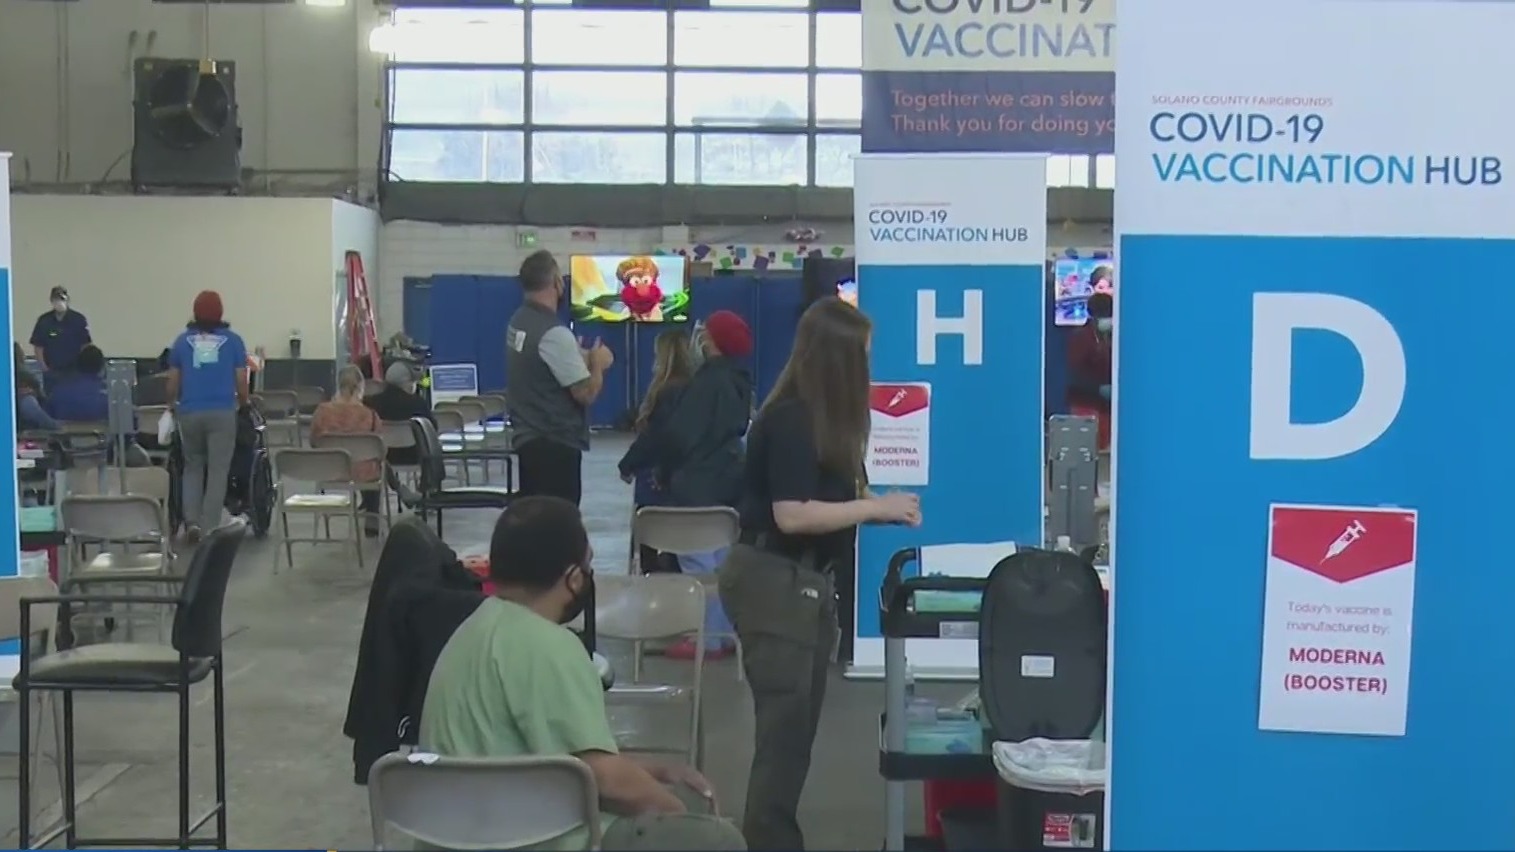 COVID-19 vaccine clinic at the Solano County fairgrounds, December 2, 2021. (CBS)